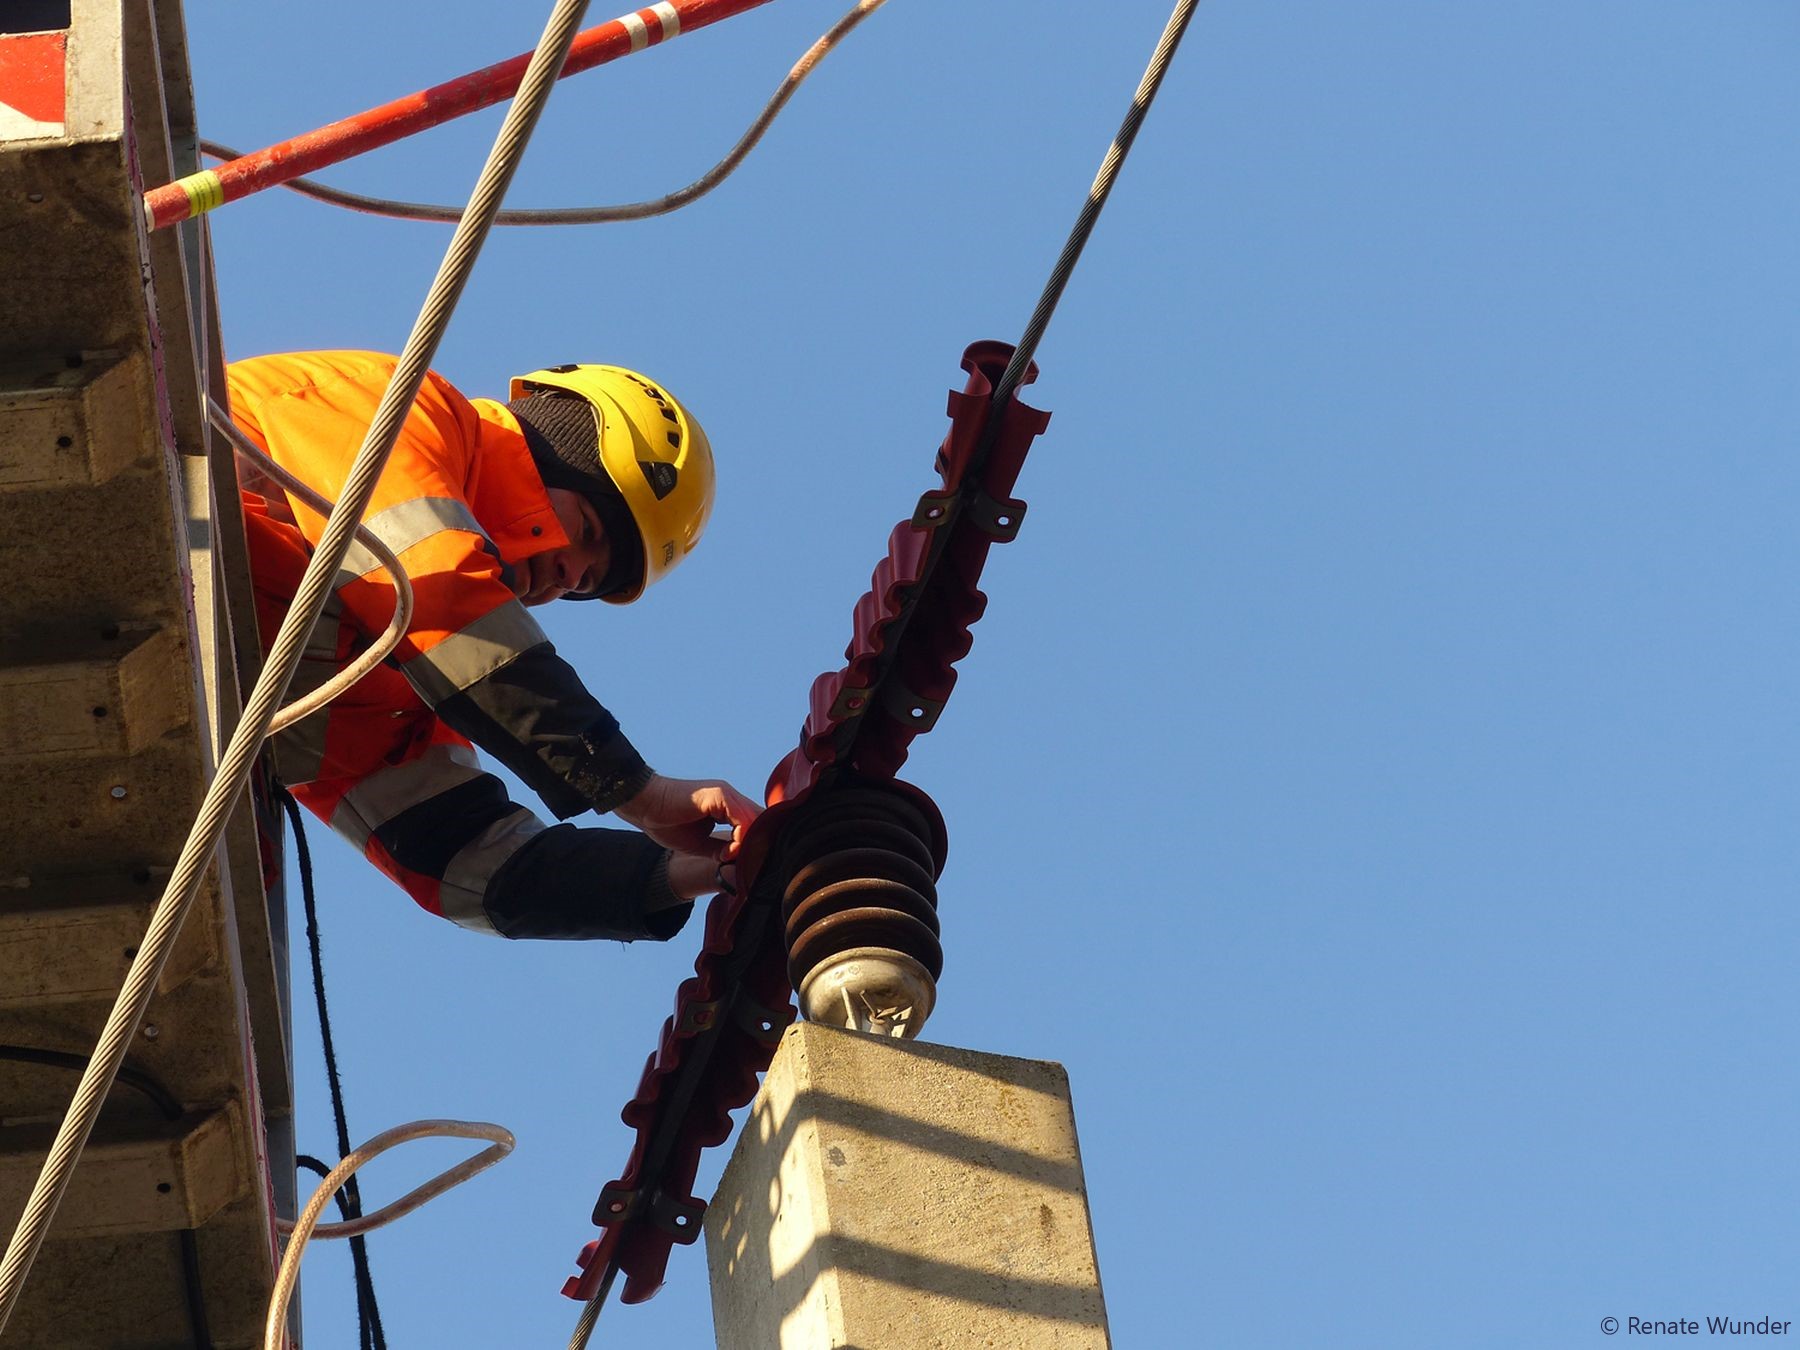 Installation of the bird protection cap on the railway pole